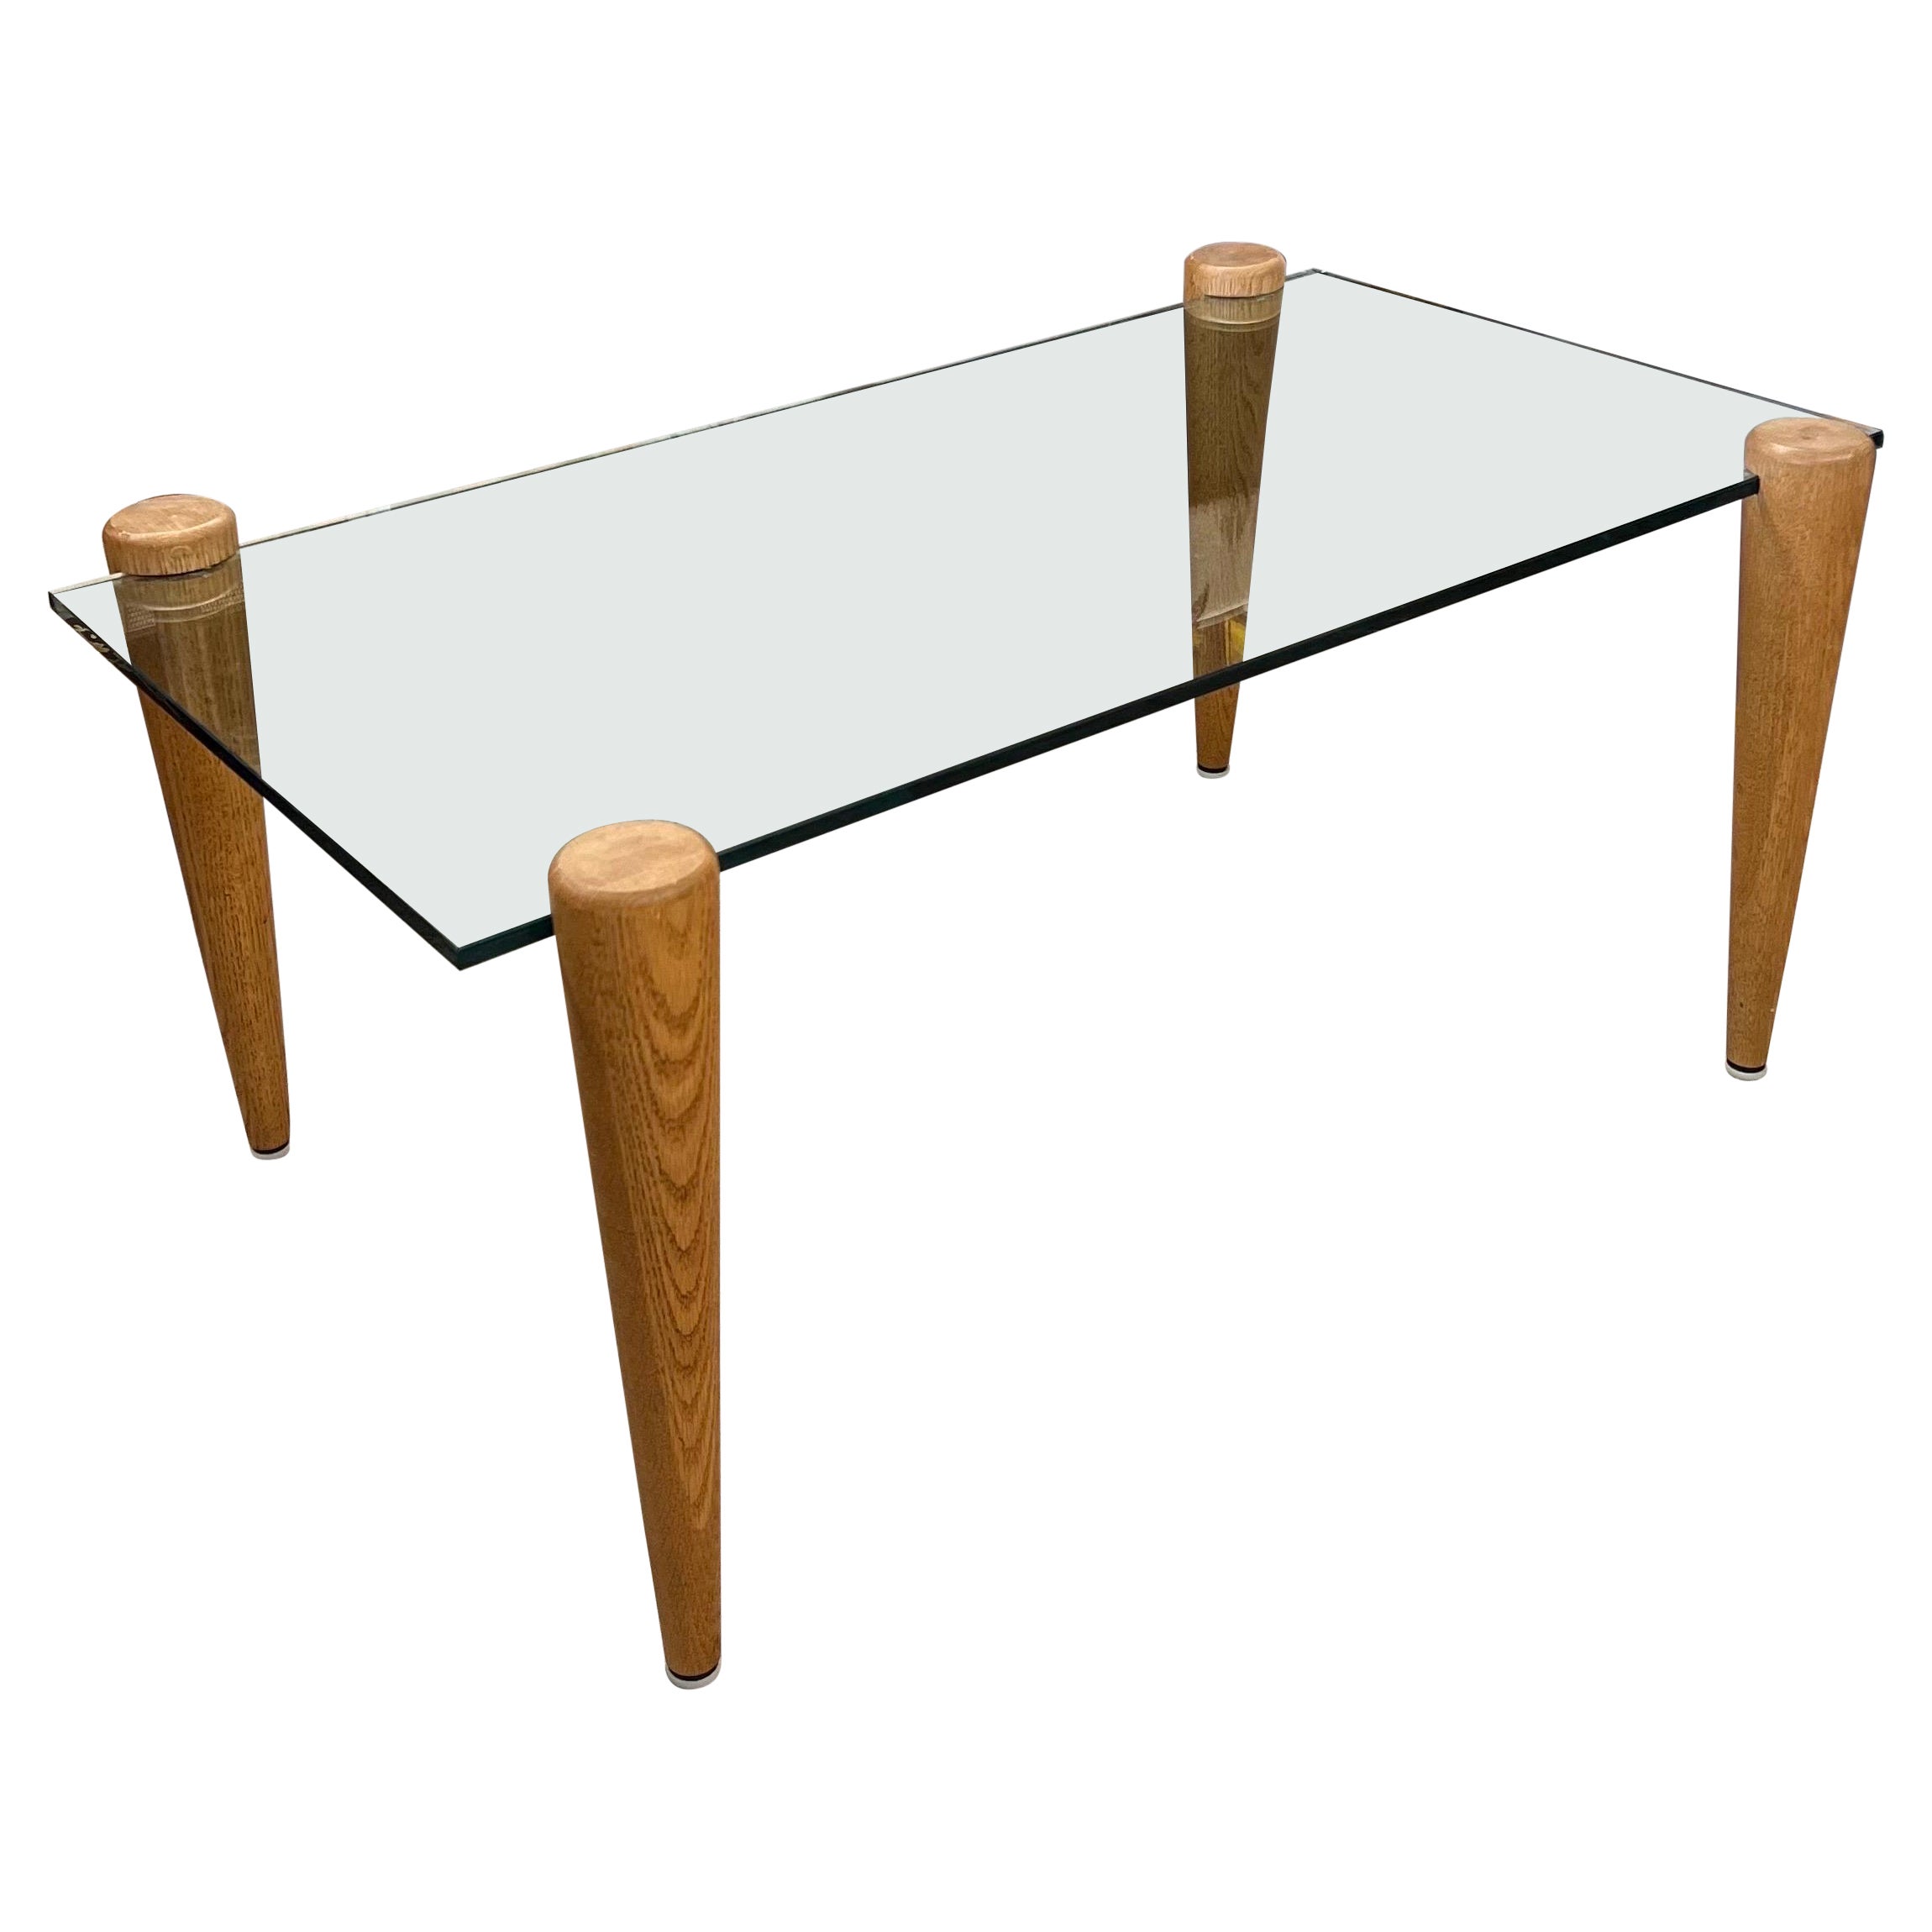 Vintage Mid-Century Modern Coffee Table with Glass Top Solid Wood Legs For Sale